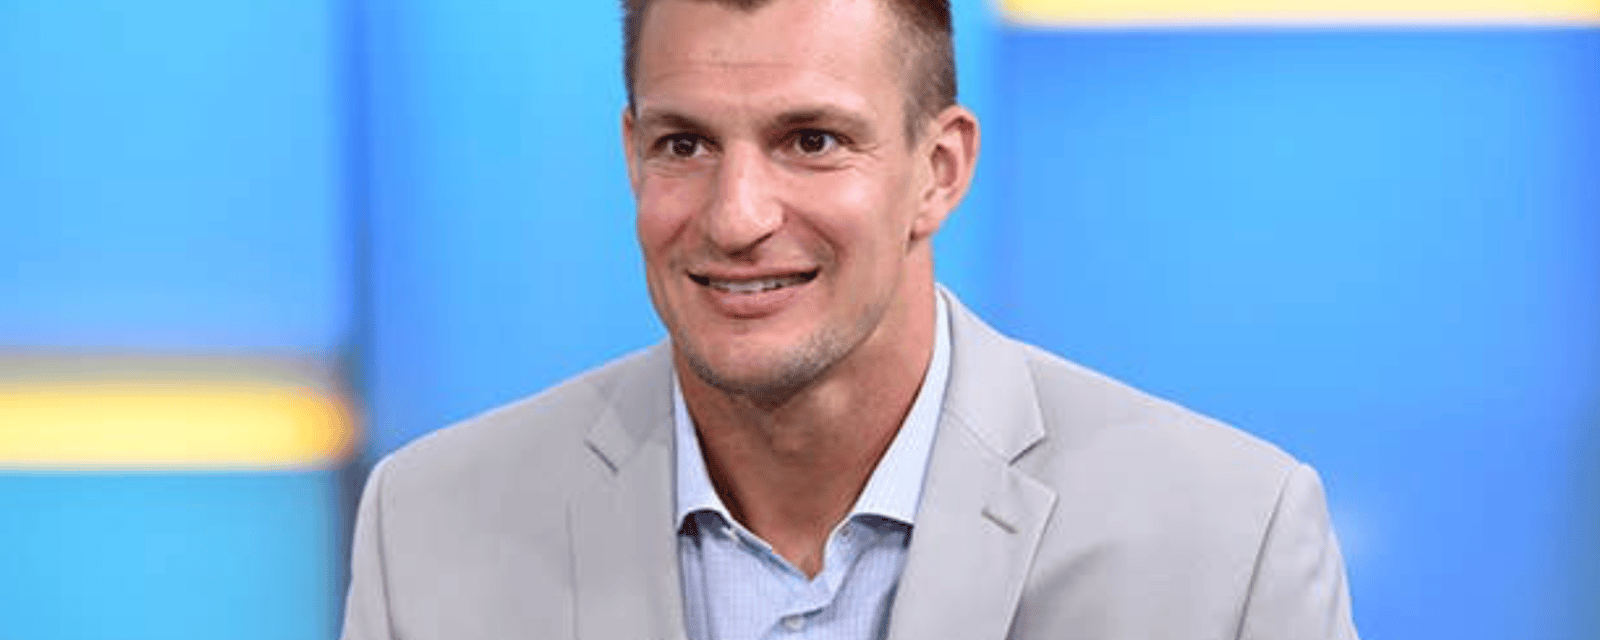 Rob Gronkowski forced into drastic legal action 